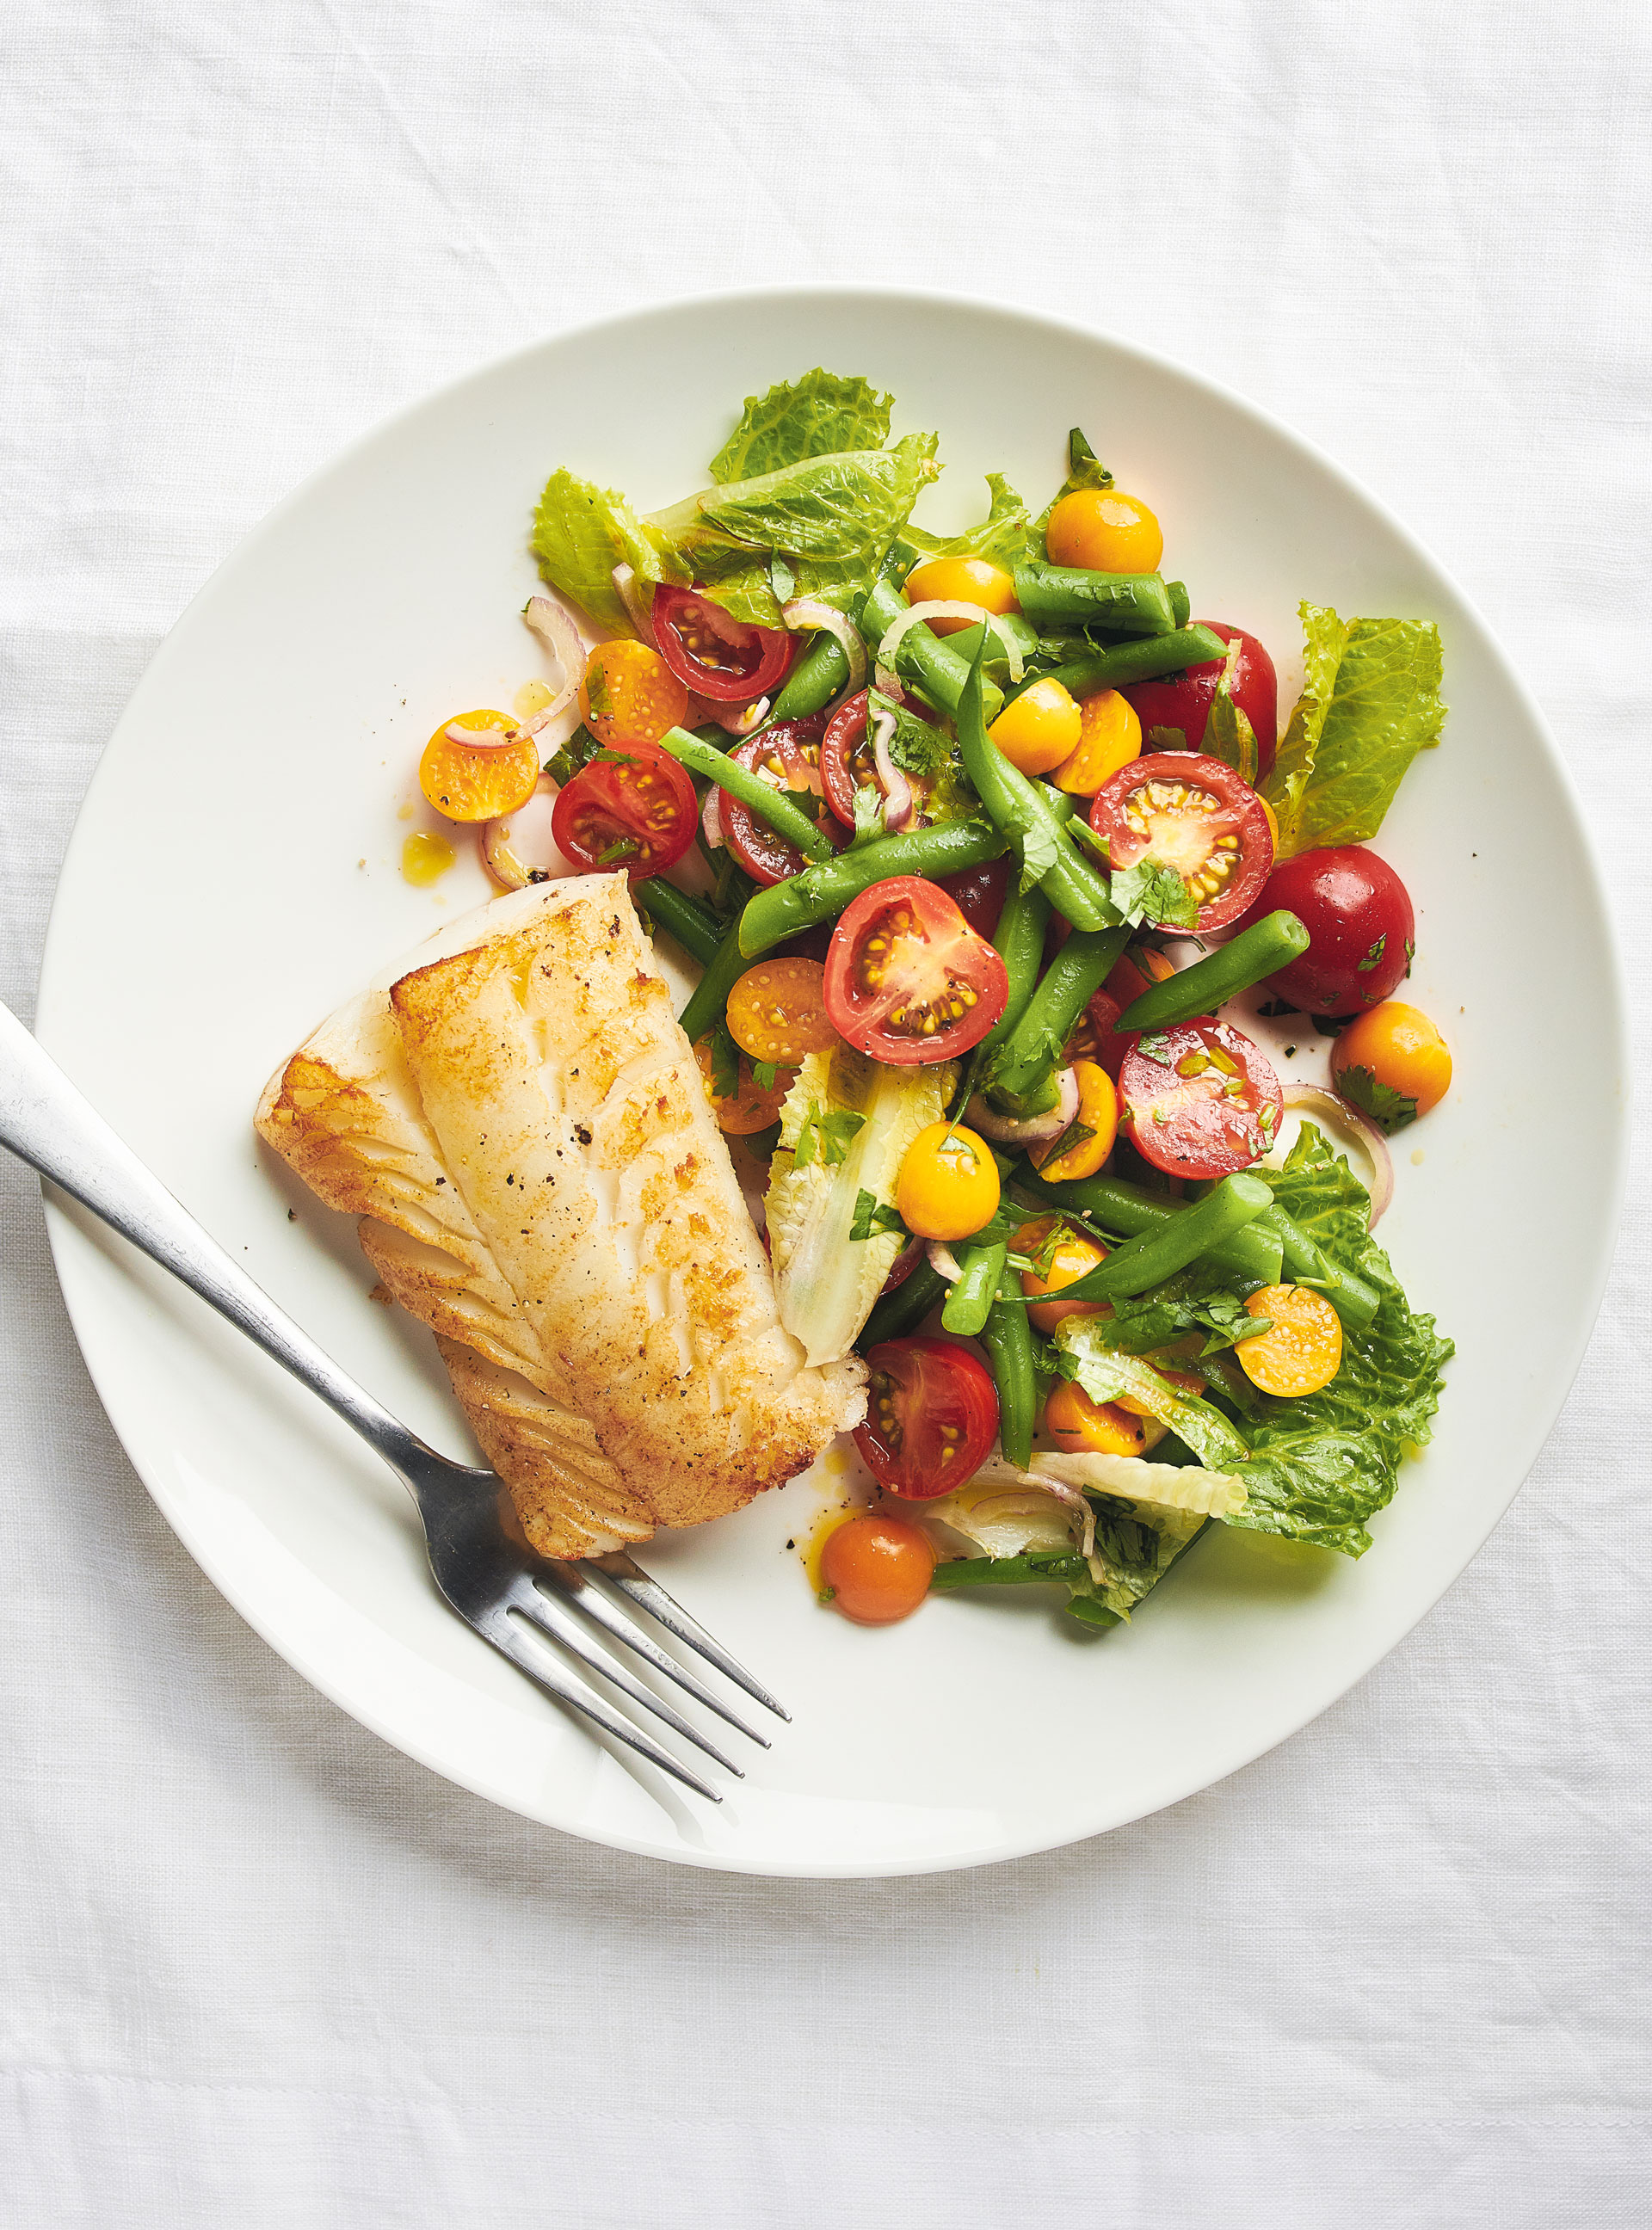 Vegetable and Ground Cherry Salad with Roasted Fish